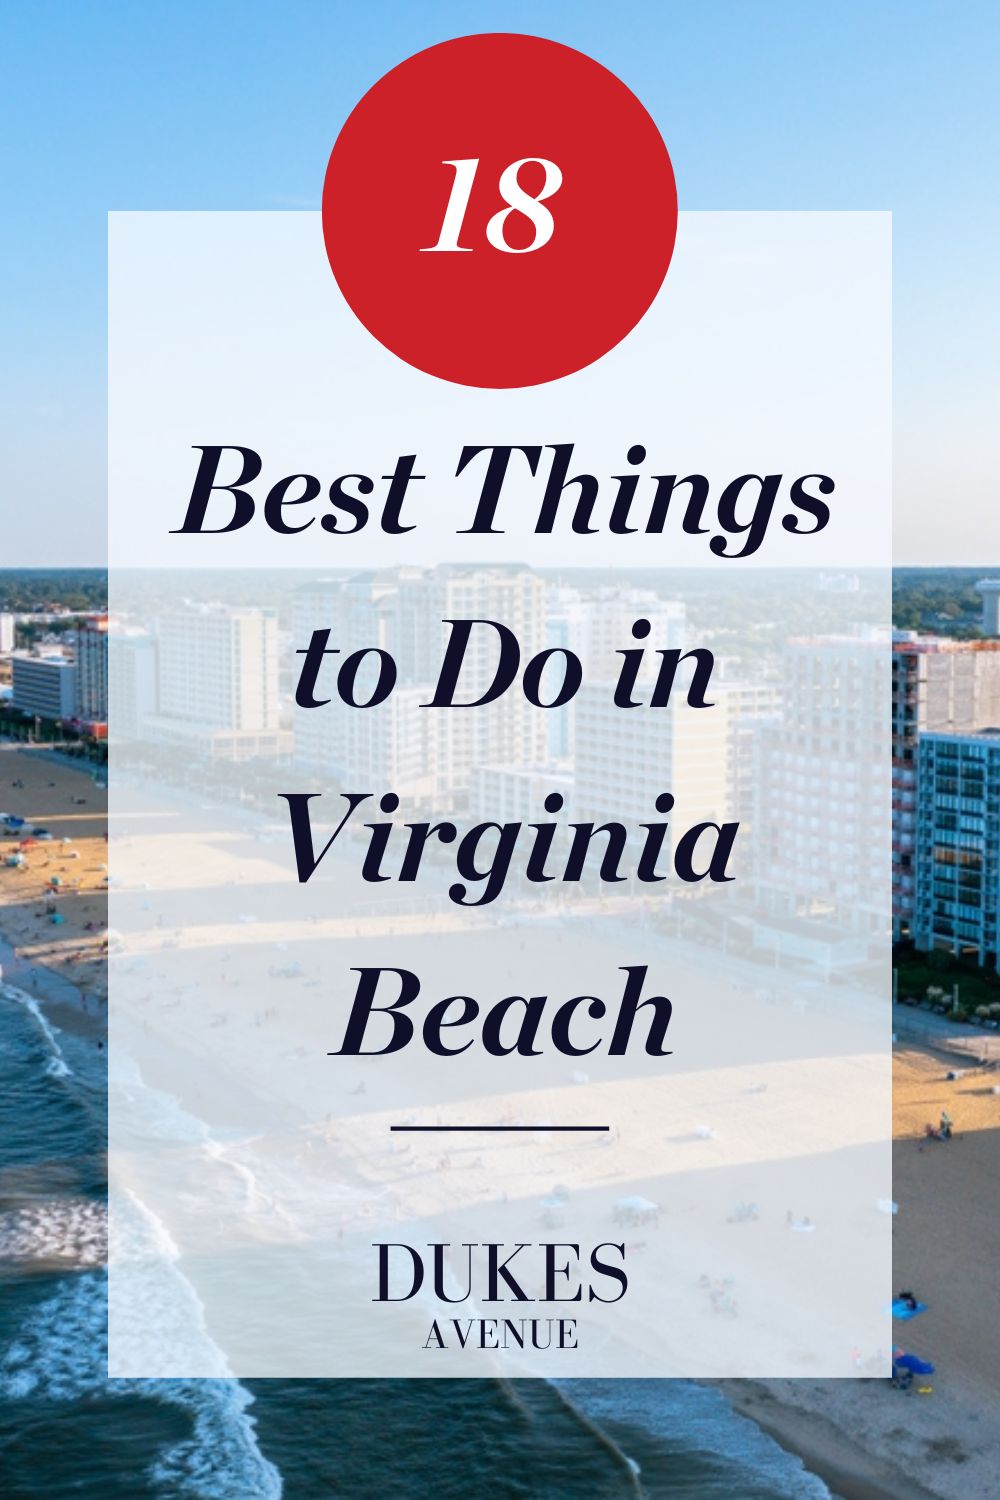 Aerial shot of Virginia Beach with text overlay '18 Best Things to Do in Virginia Beach'